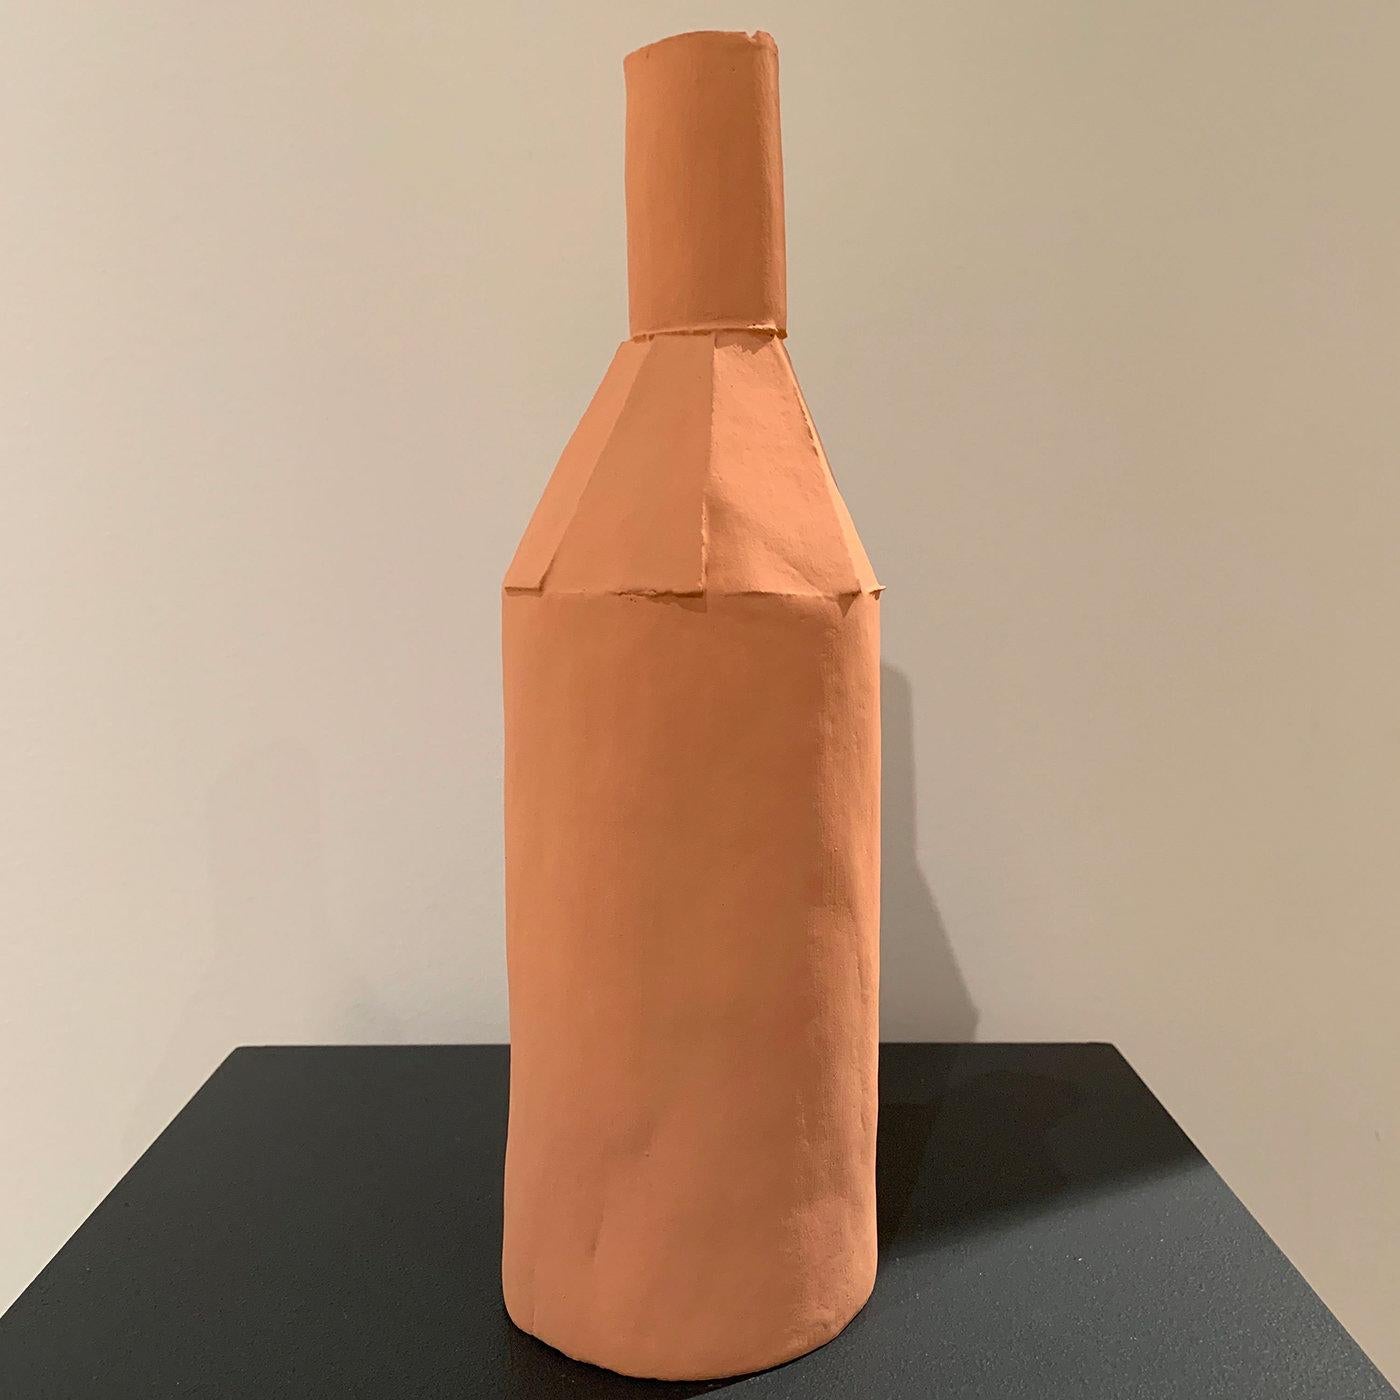 Elegantly shaped like a bottle with an irregular silhouette and a paper-like surface, this superb bottle has a delicate pink hue that gives it a dream-like allure. This piece is crafted by hand using a complex method, creating a unique work of art